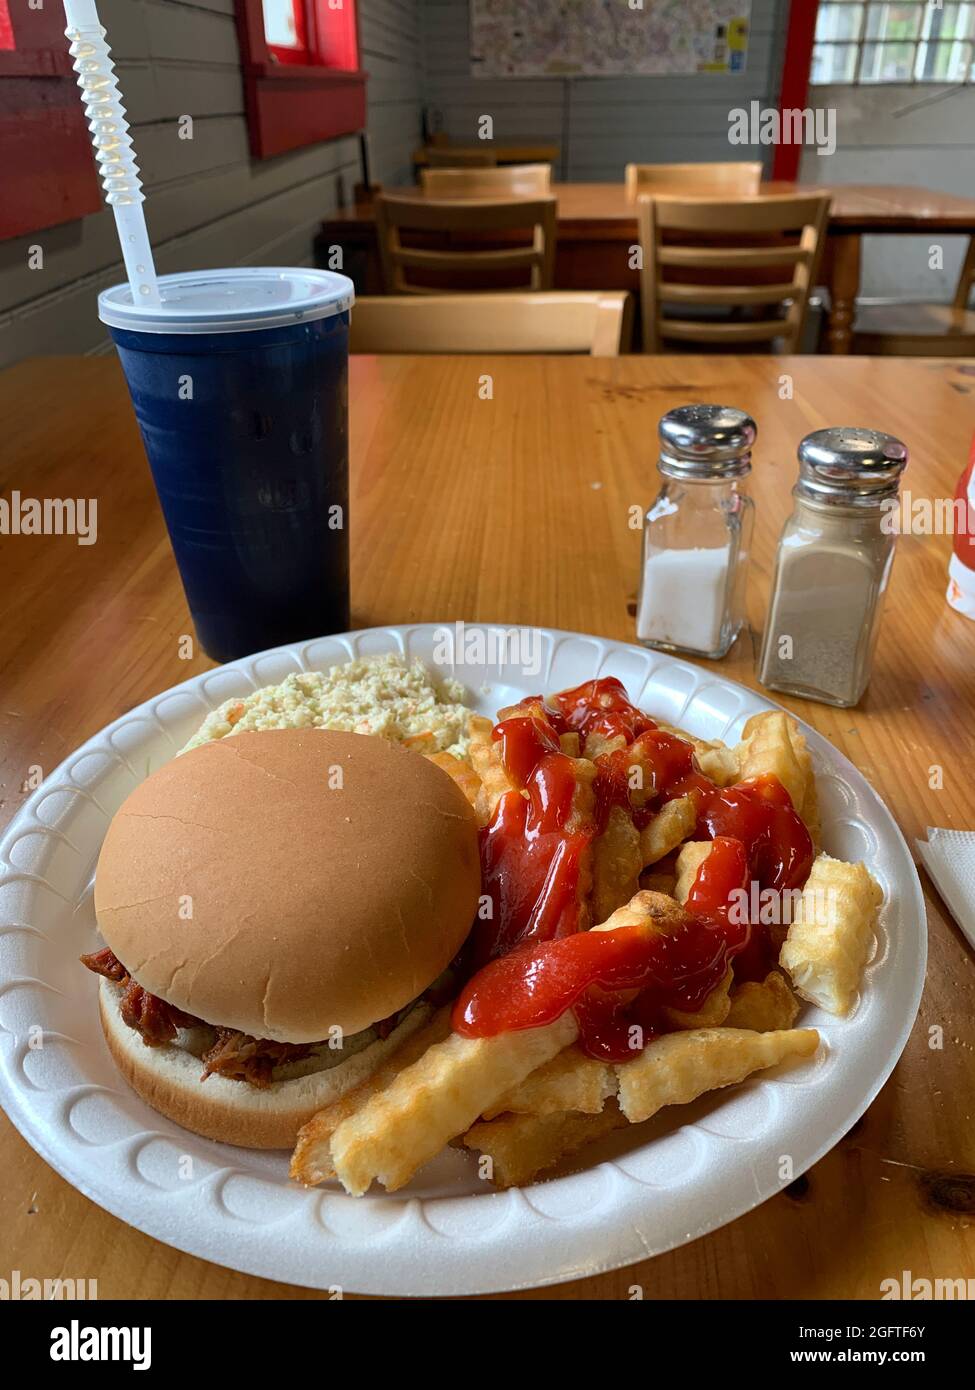 Cass, West Virginia. Lunch: Pulled Pork Sandwich, French Fries, Cole Slaw with Beverage. Stock Photo